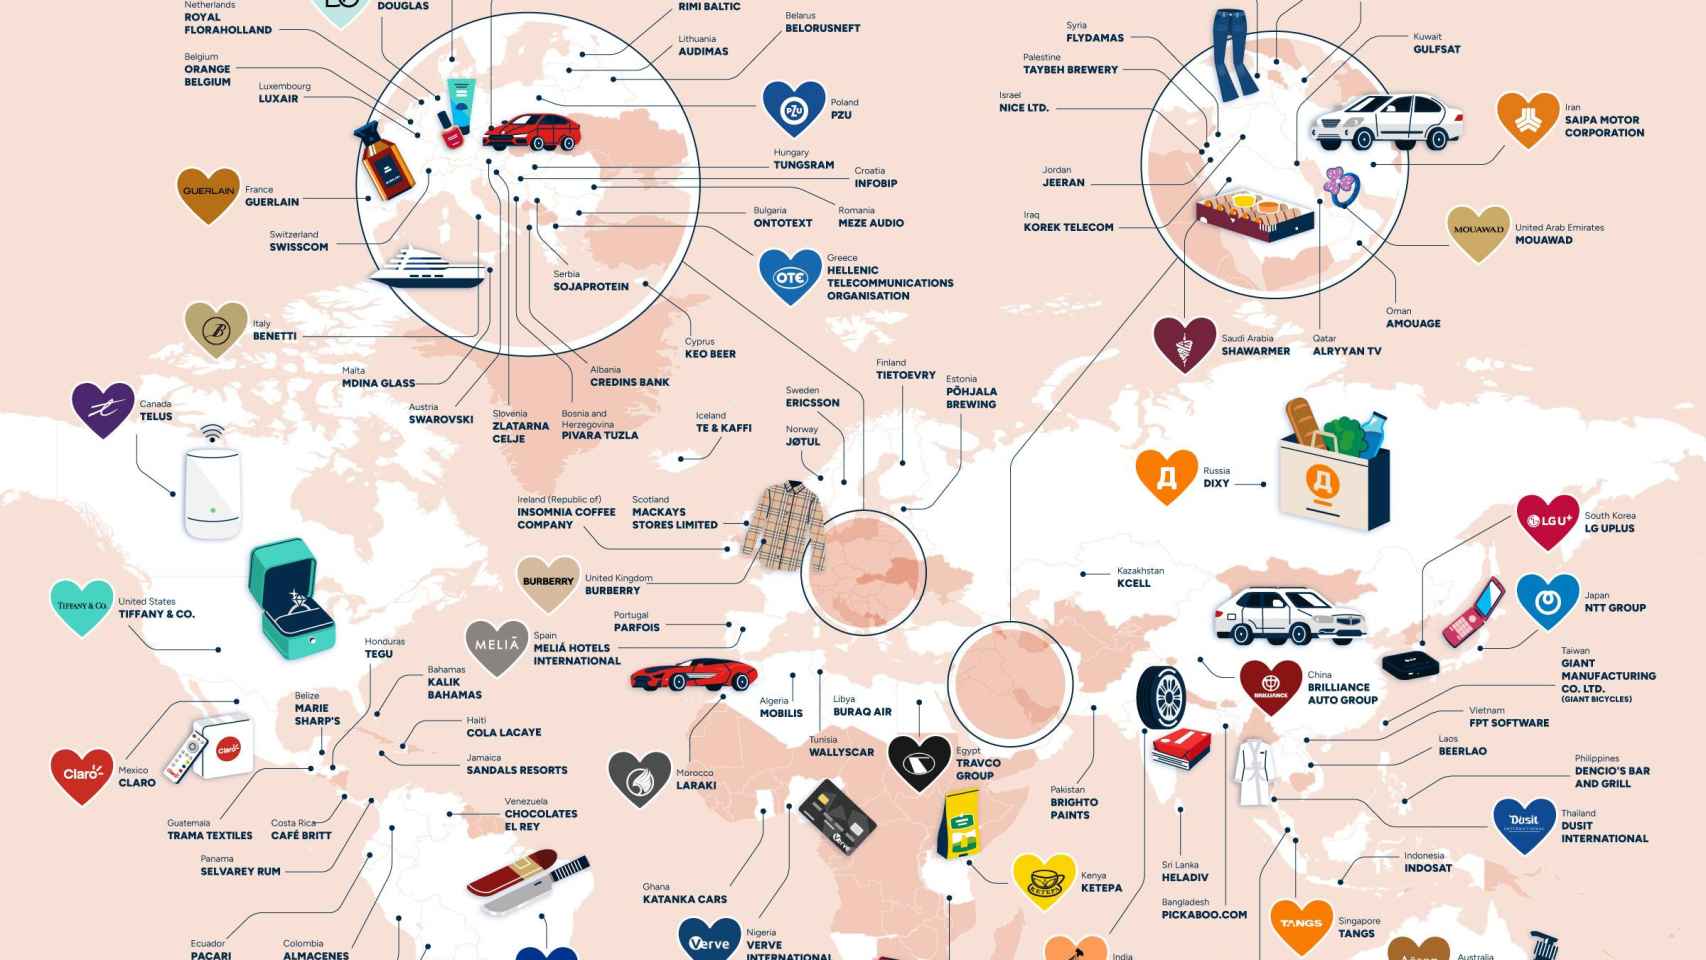 01_Most-Loved-Major-Brands-in-Every-Country